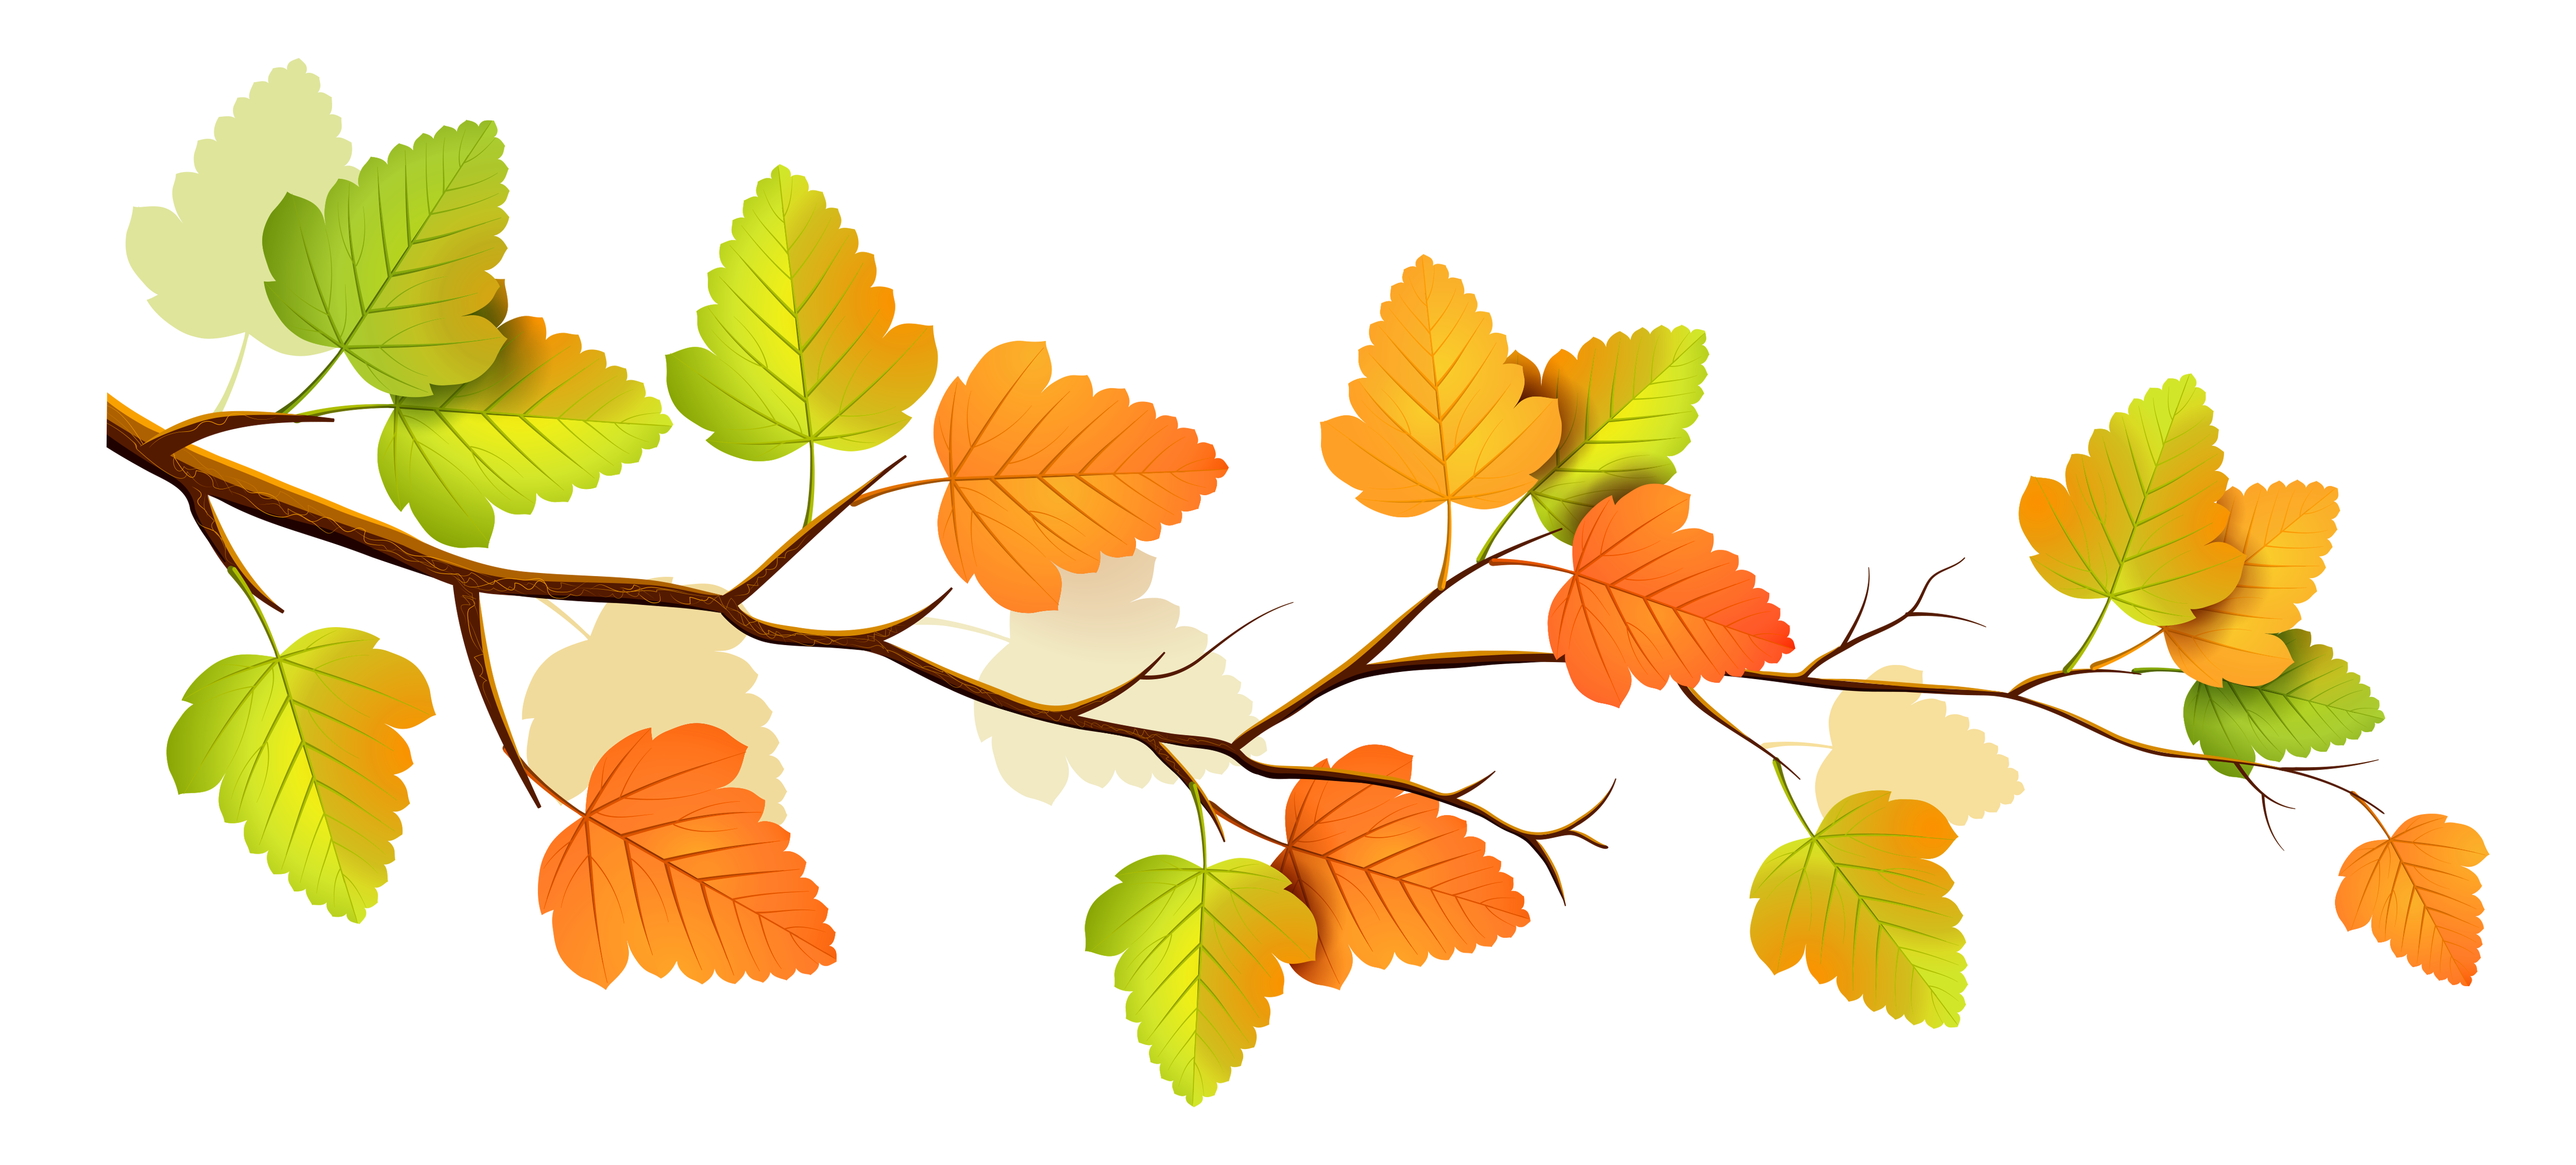 Fall tree branch clipart clipground jpg